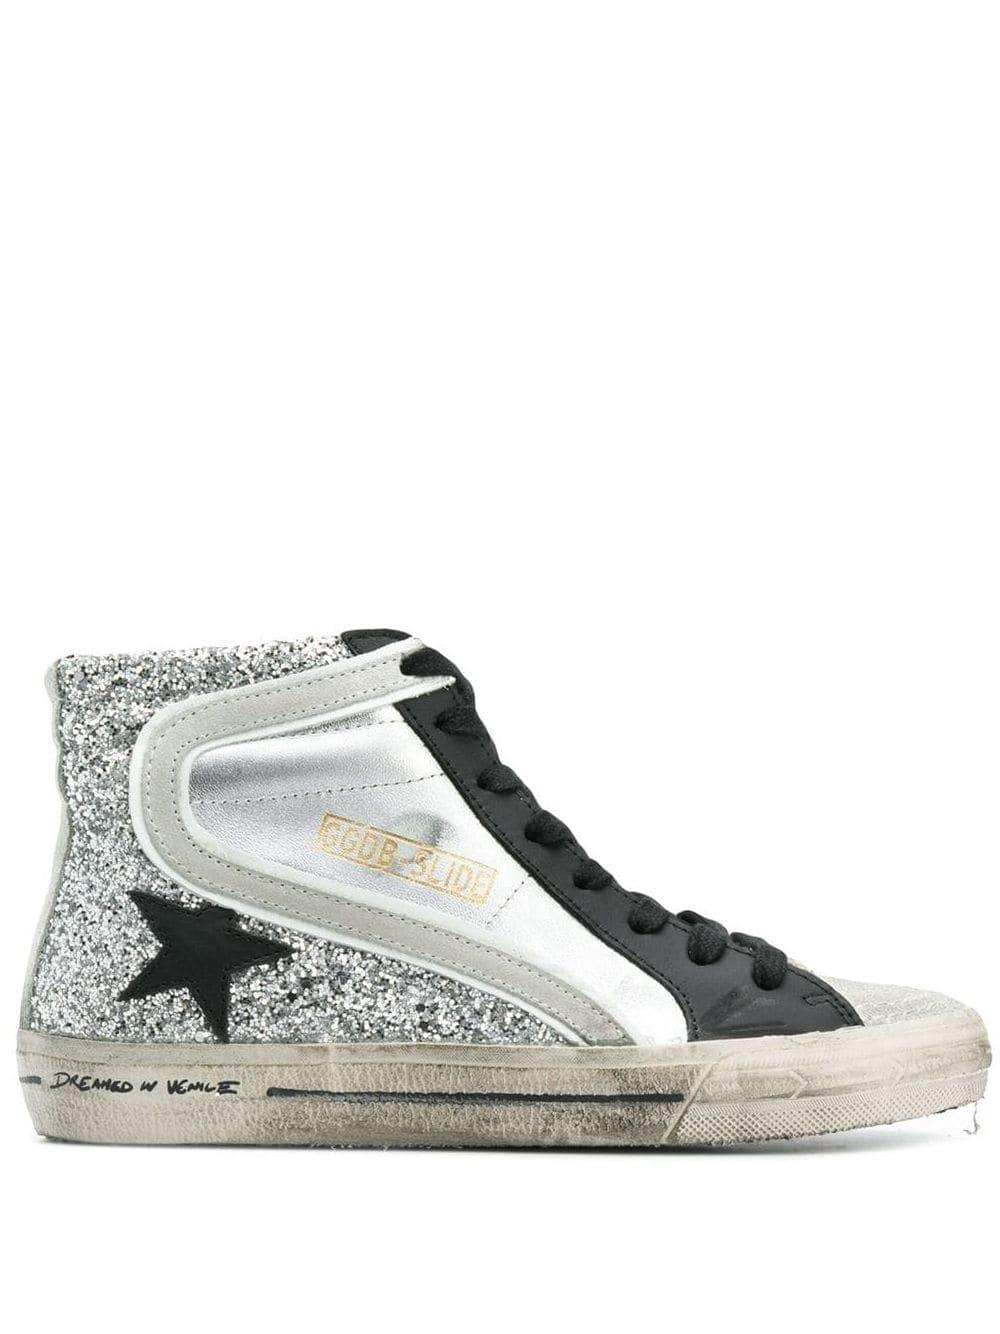 golden goose montante femme, clearance Save 64% available - simourdesign.com